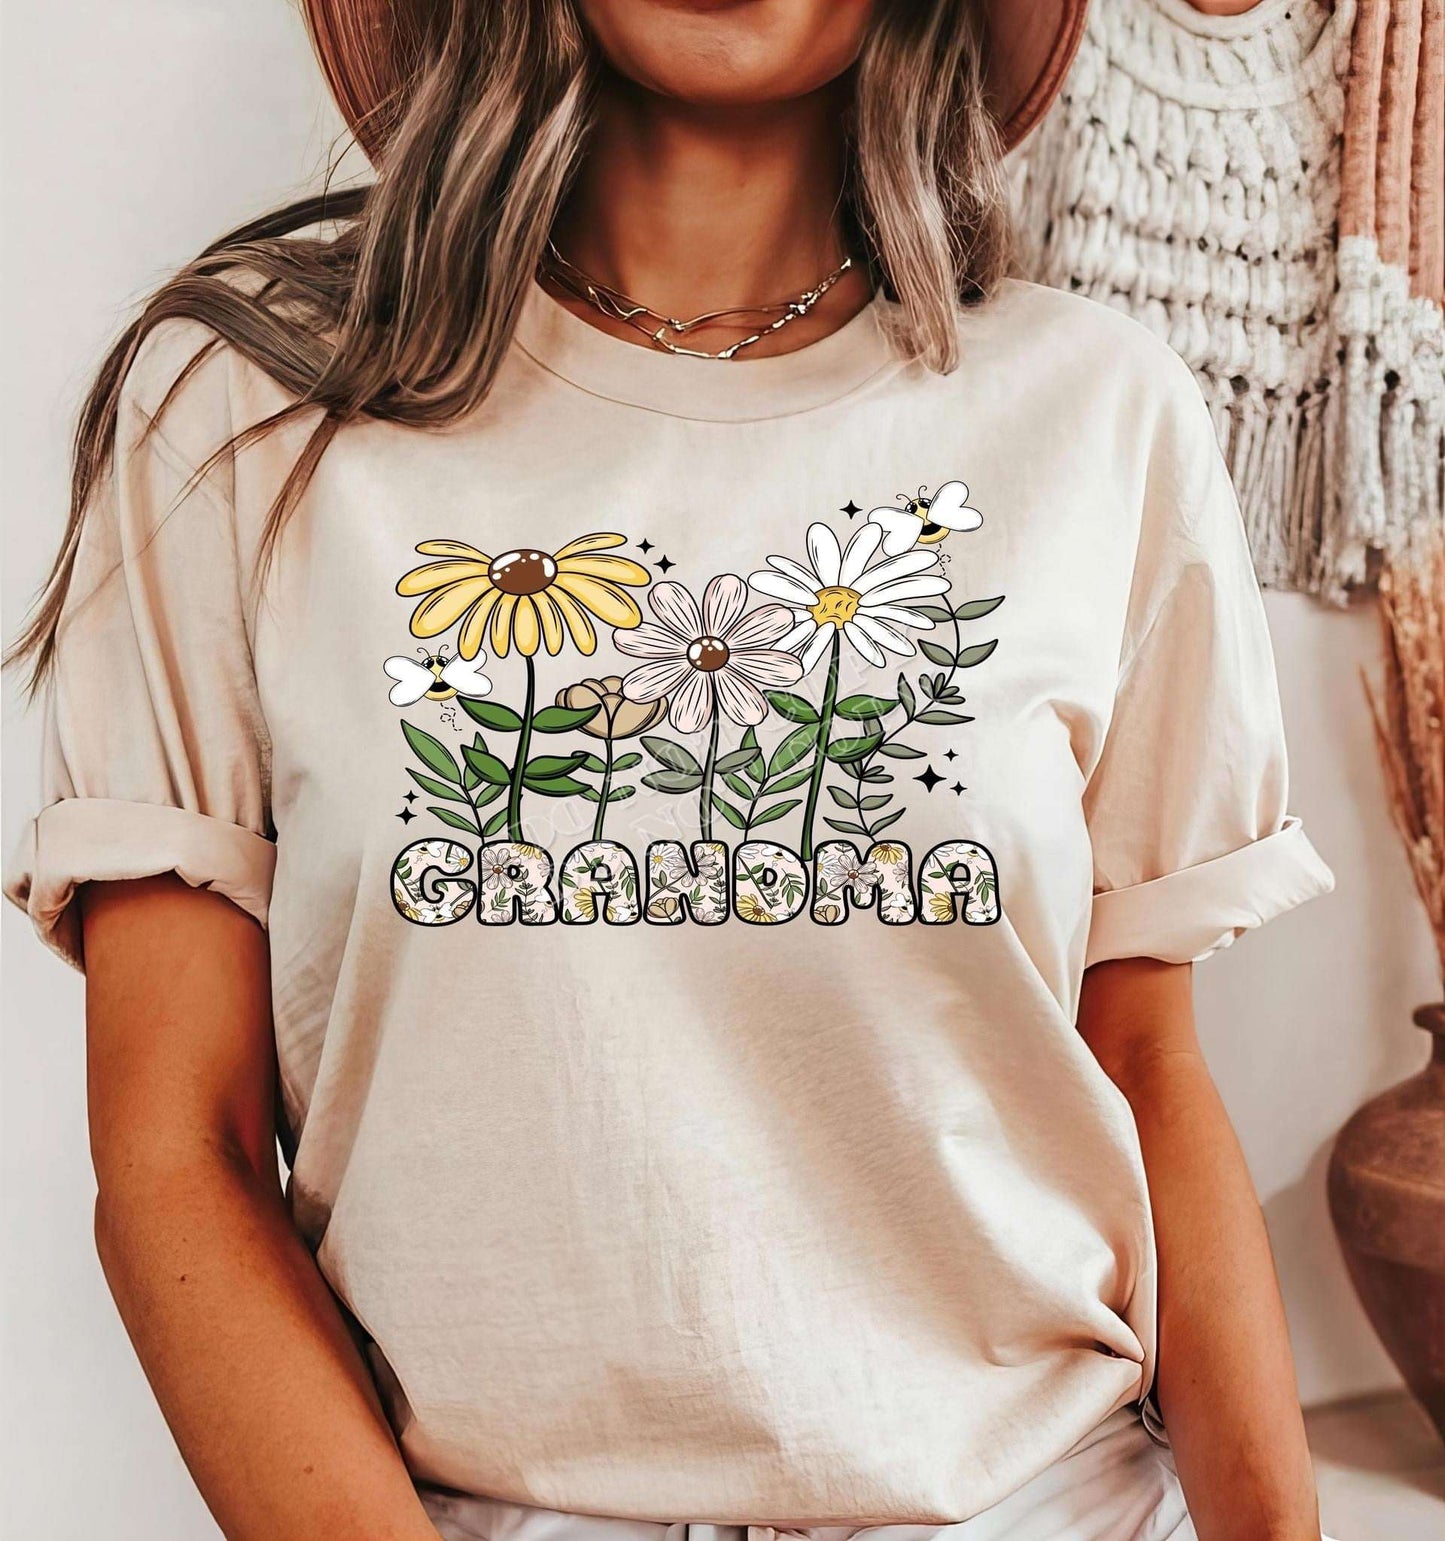 Celebrate Grandma: Grandma Perfect' Tee with Daisy Floral Design for Mother's Day Daisy Designs & Creations Collection T-Shirt 17 Daisy Designs & Creations LLC